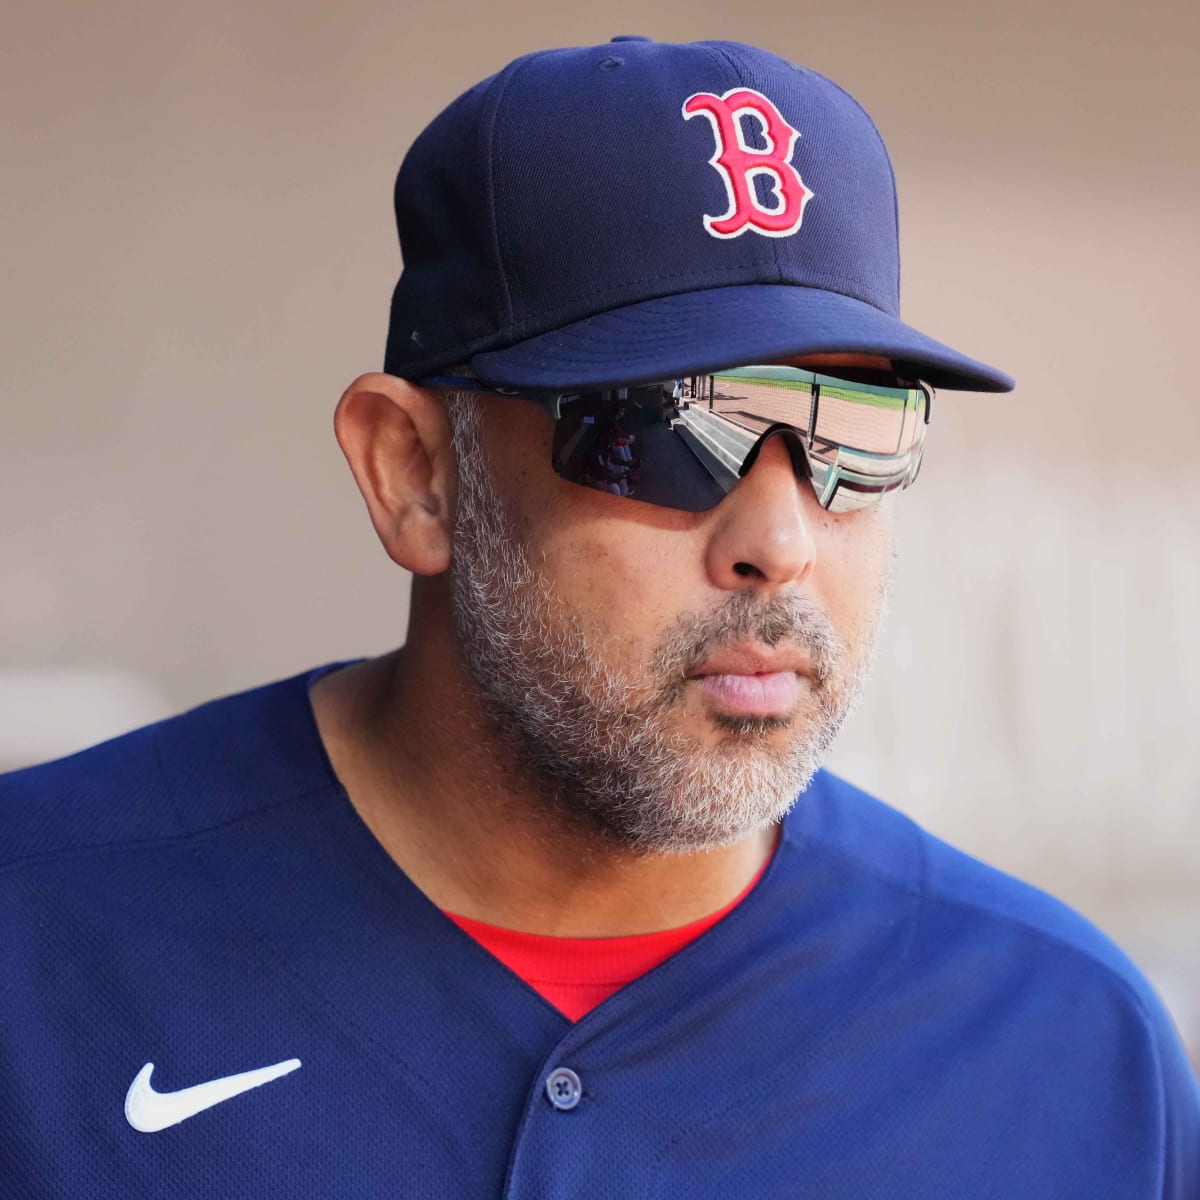 Mastrodonato: Alex Cora brings much-needed energy back to the Red Sox